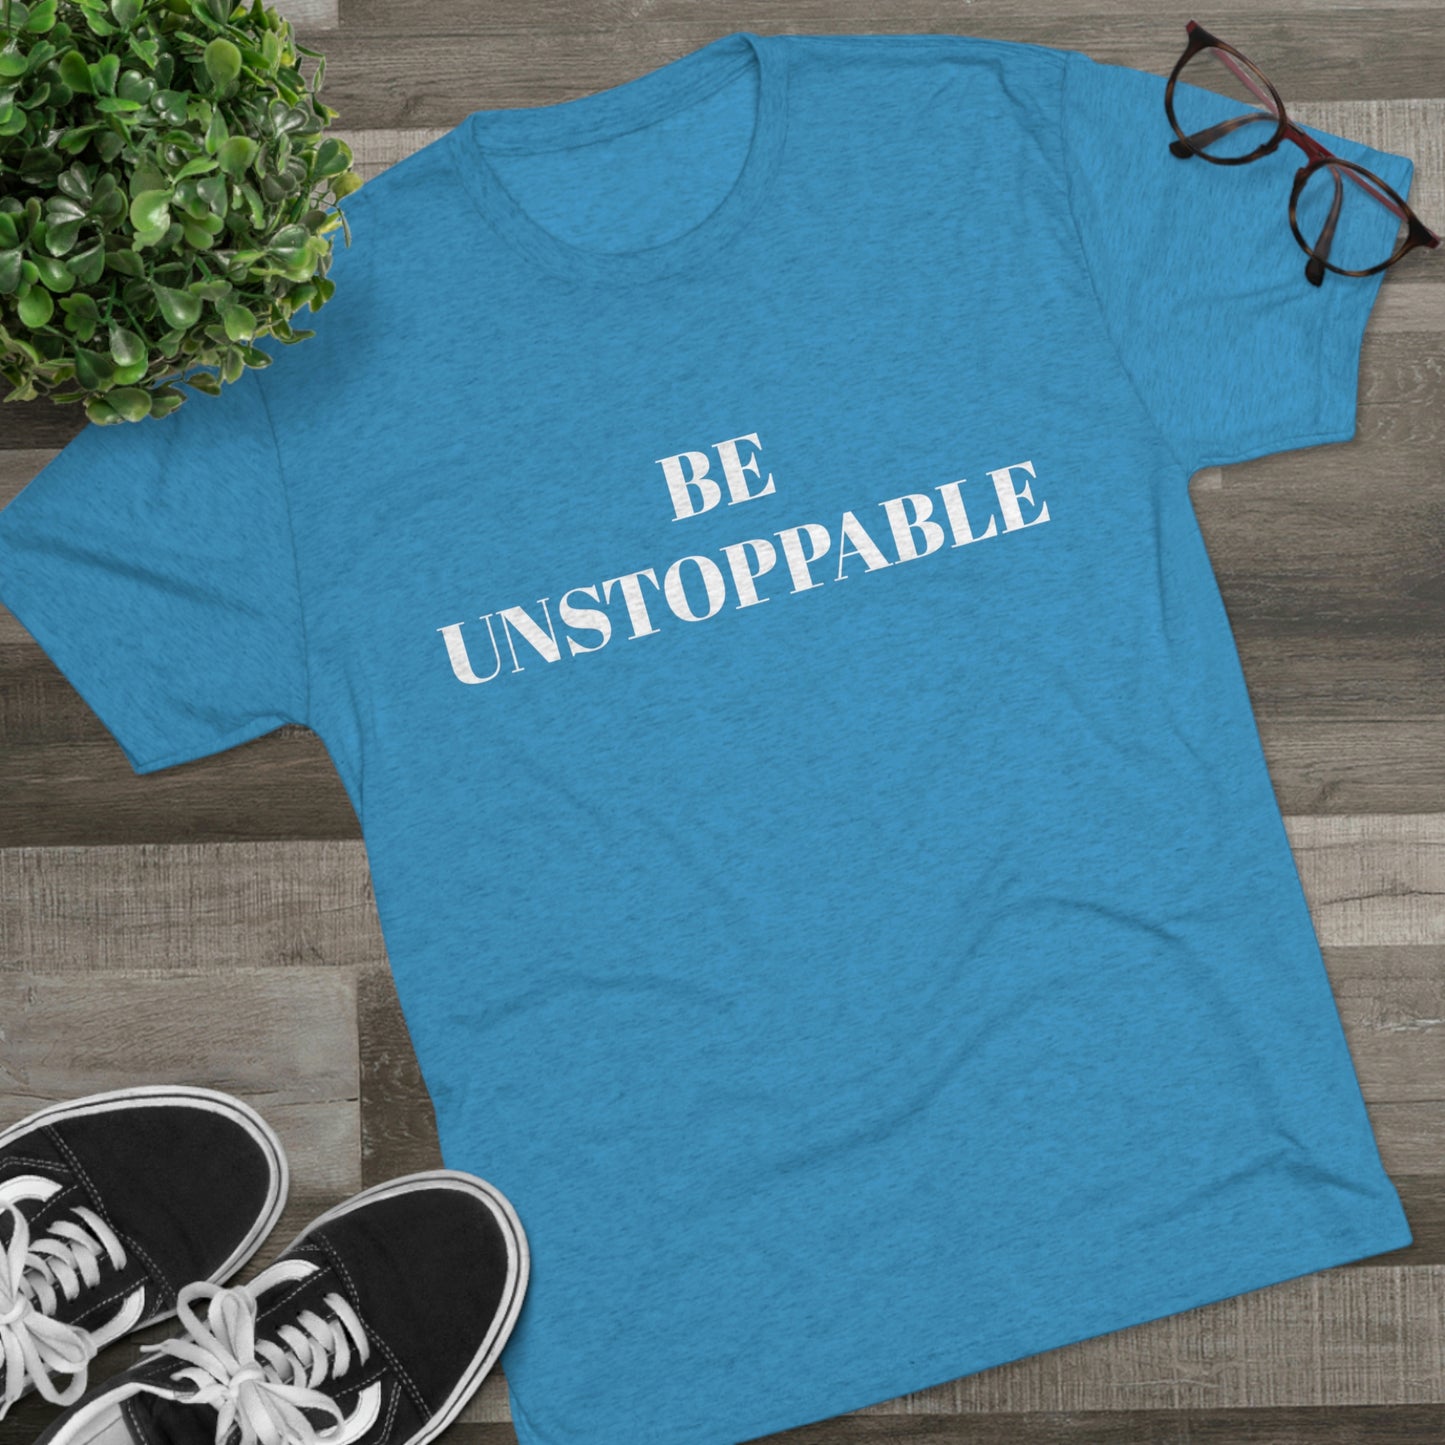 Be Unstoppable - Unisex Tri-Blend Crew Tee